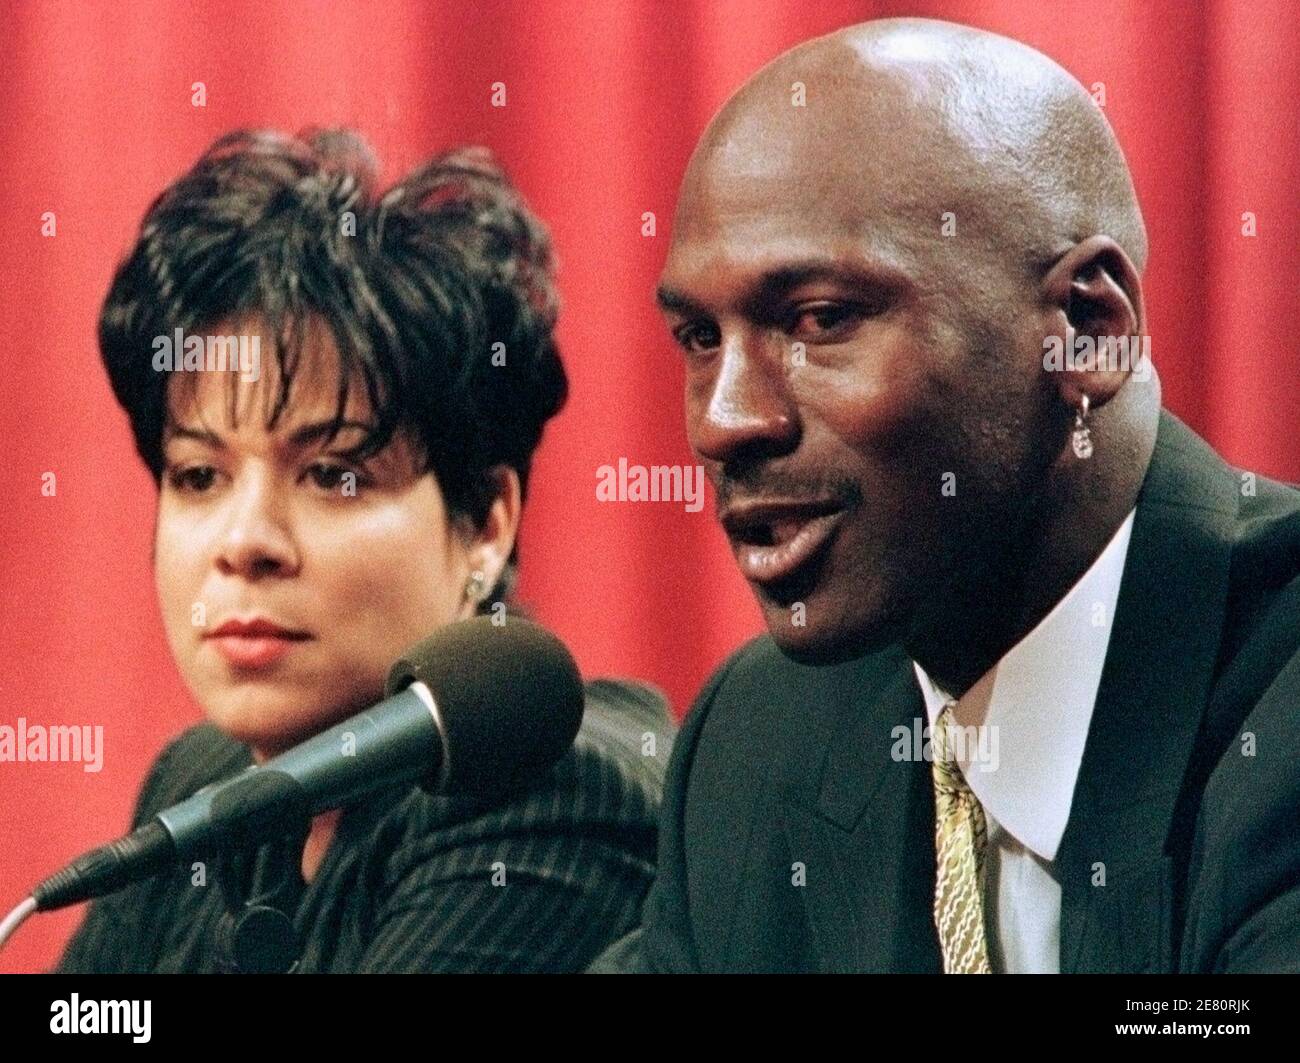 Former basketball superstar Michael Jordan and his wife Juanita Vanoy are  shown in this January 13, 1999 file photograph as Jordan announced that he  was retiring from the game of basketball in